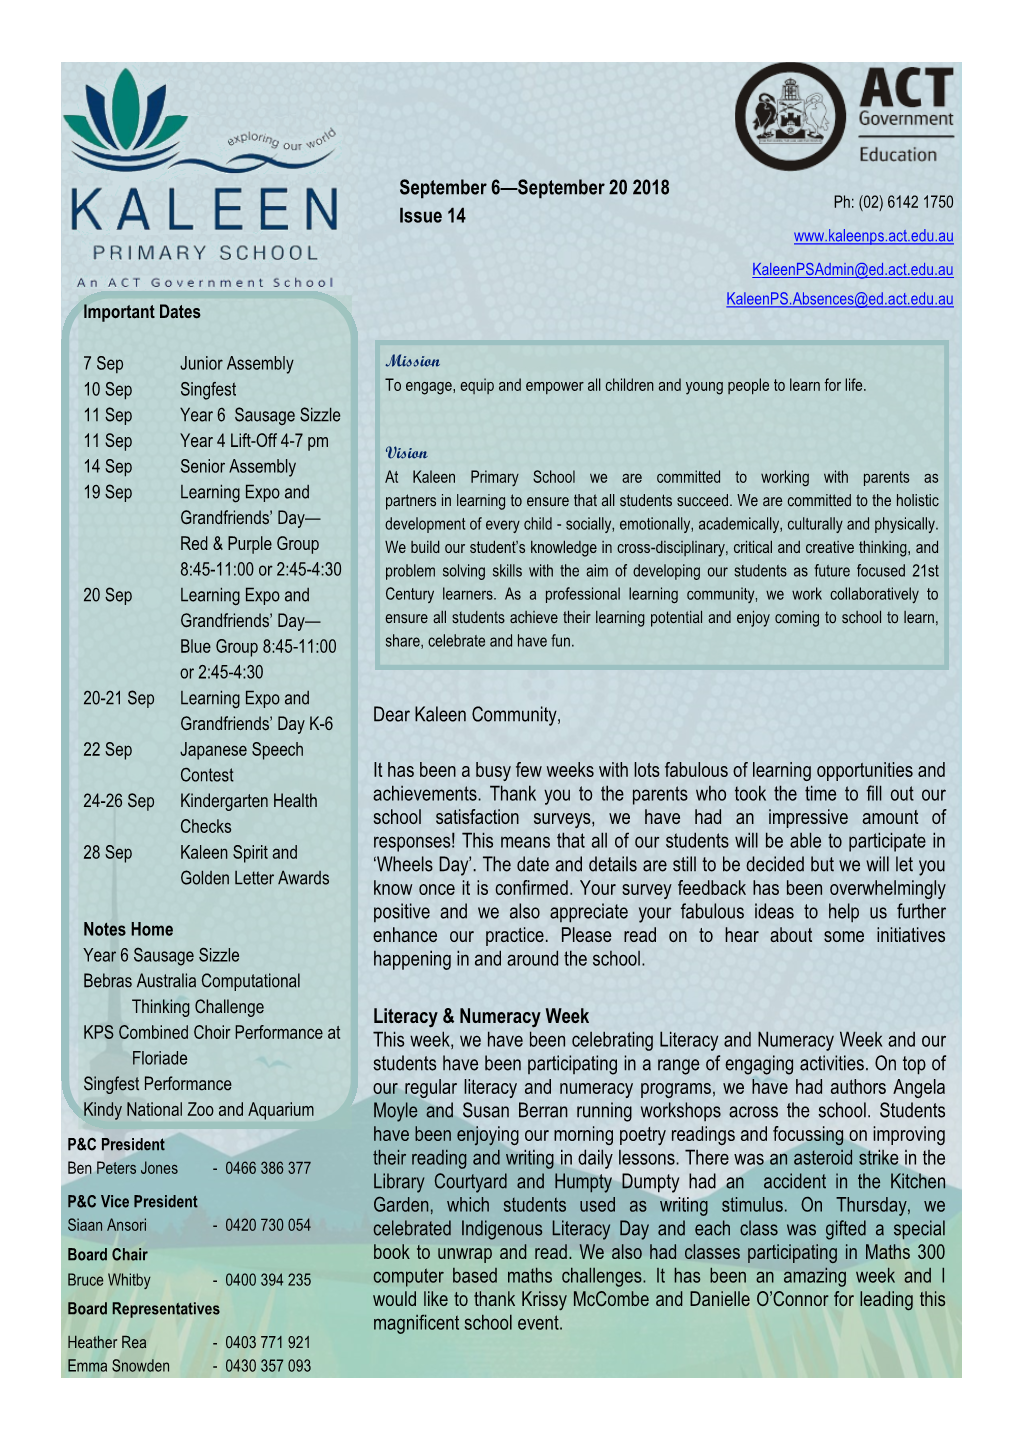 September 6—September 20 2018 Issue 14 Dear Kaleen Community, It Has Been a Busy Few Weeks with Lots Fabulous of Learning